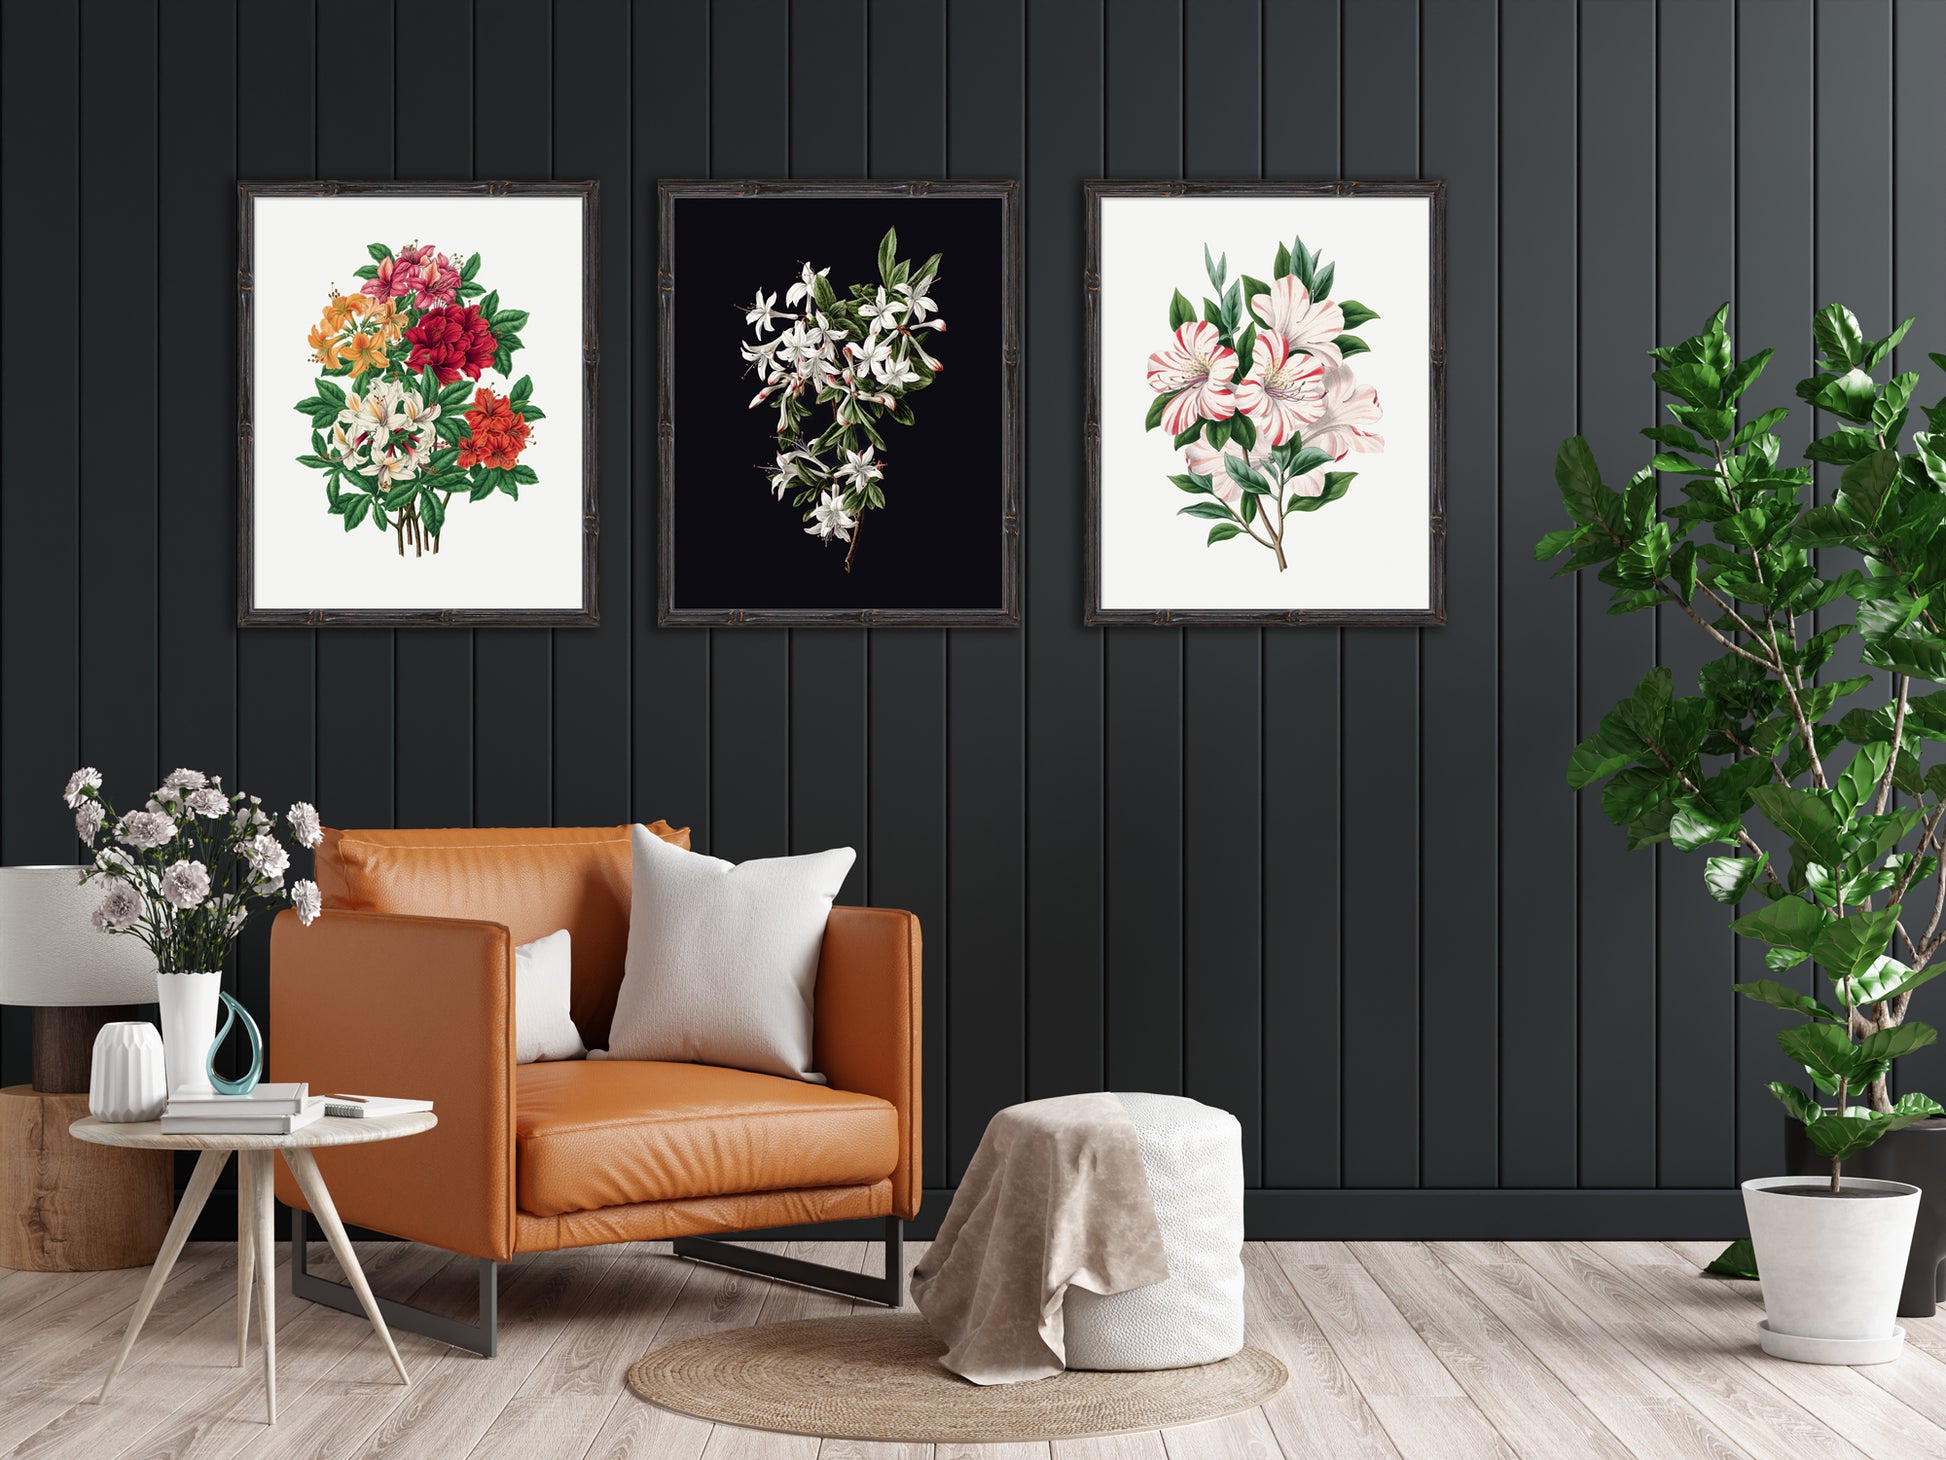 dark room black walls with leather chair and Vintage azalea prints